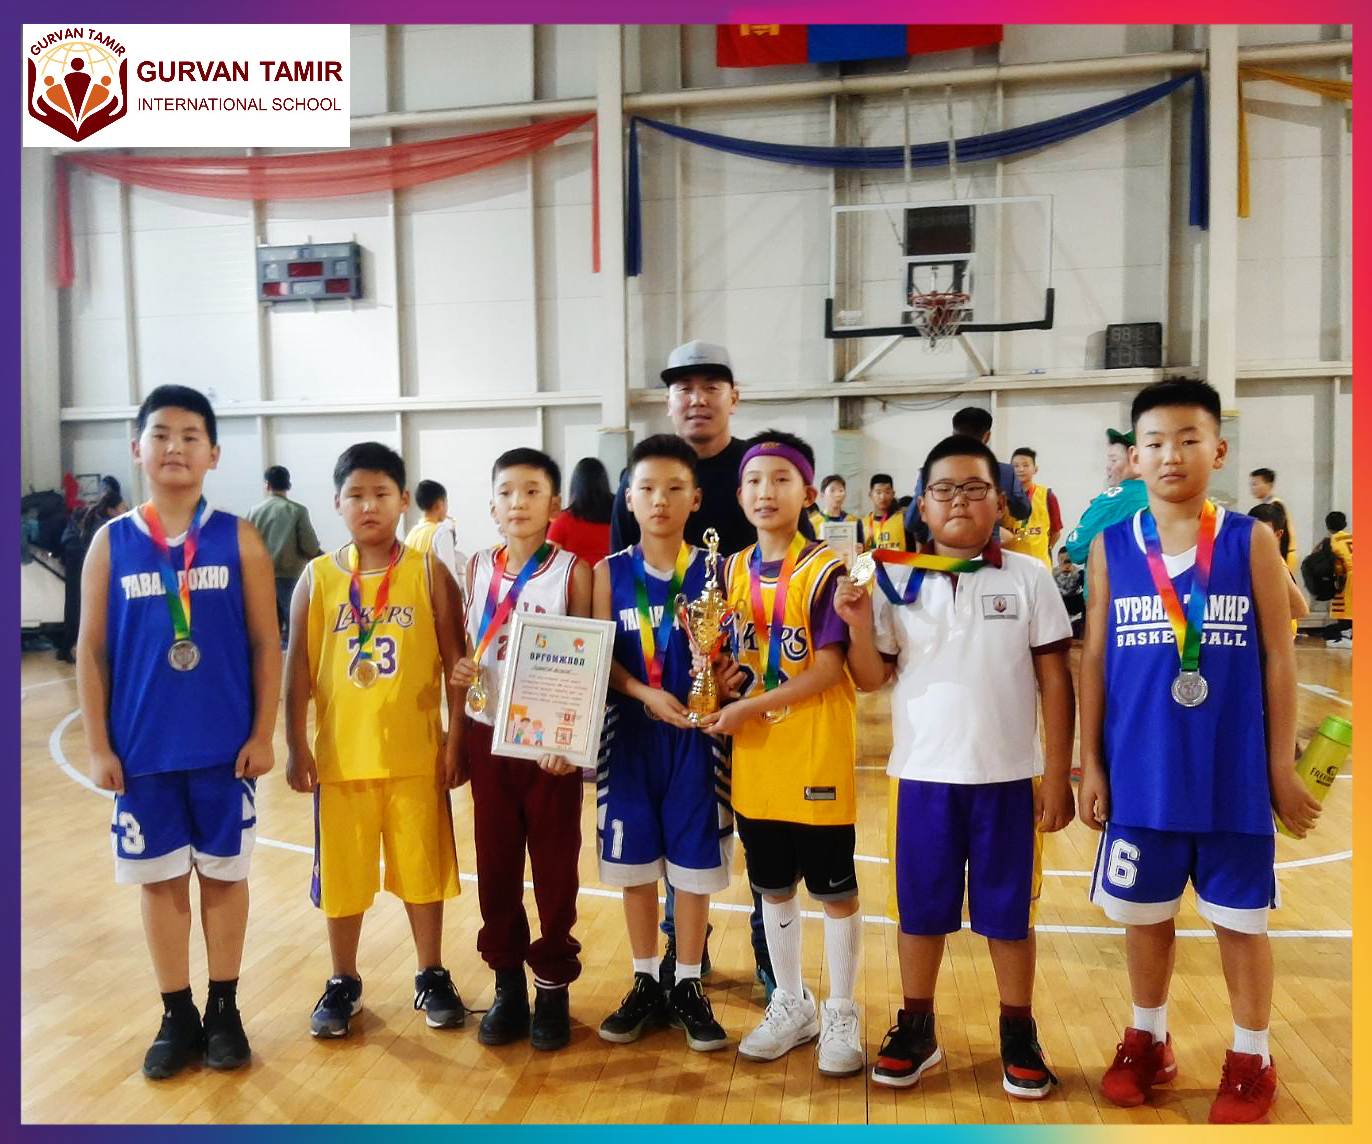 GURVAN TAMIR SCHOOL STUDENTS CAPTURE GOLD AND SILVER MEDALS AT NATIONAL YOUTH BASKETBALL TOURNAMENT